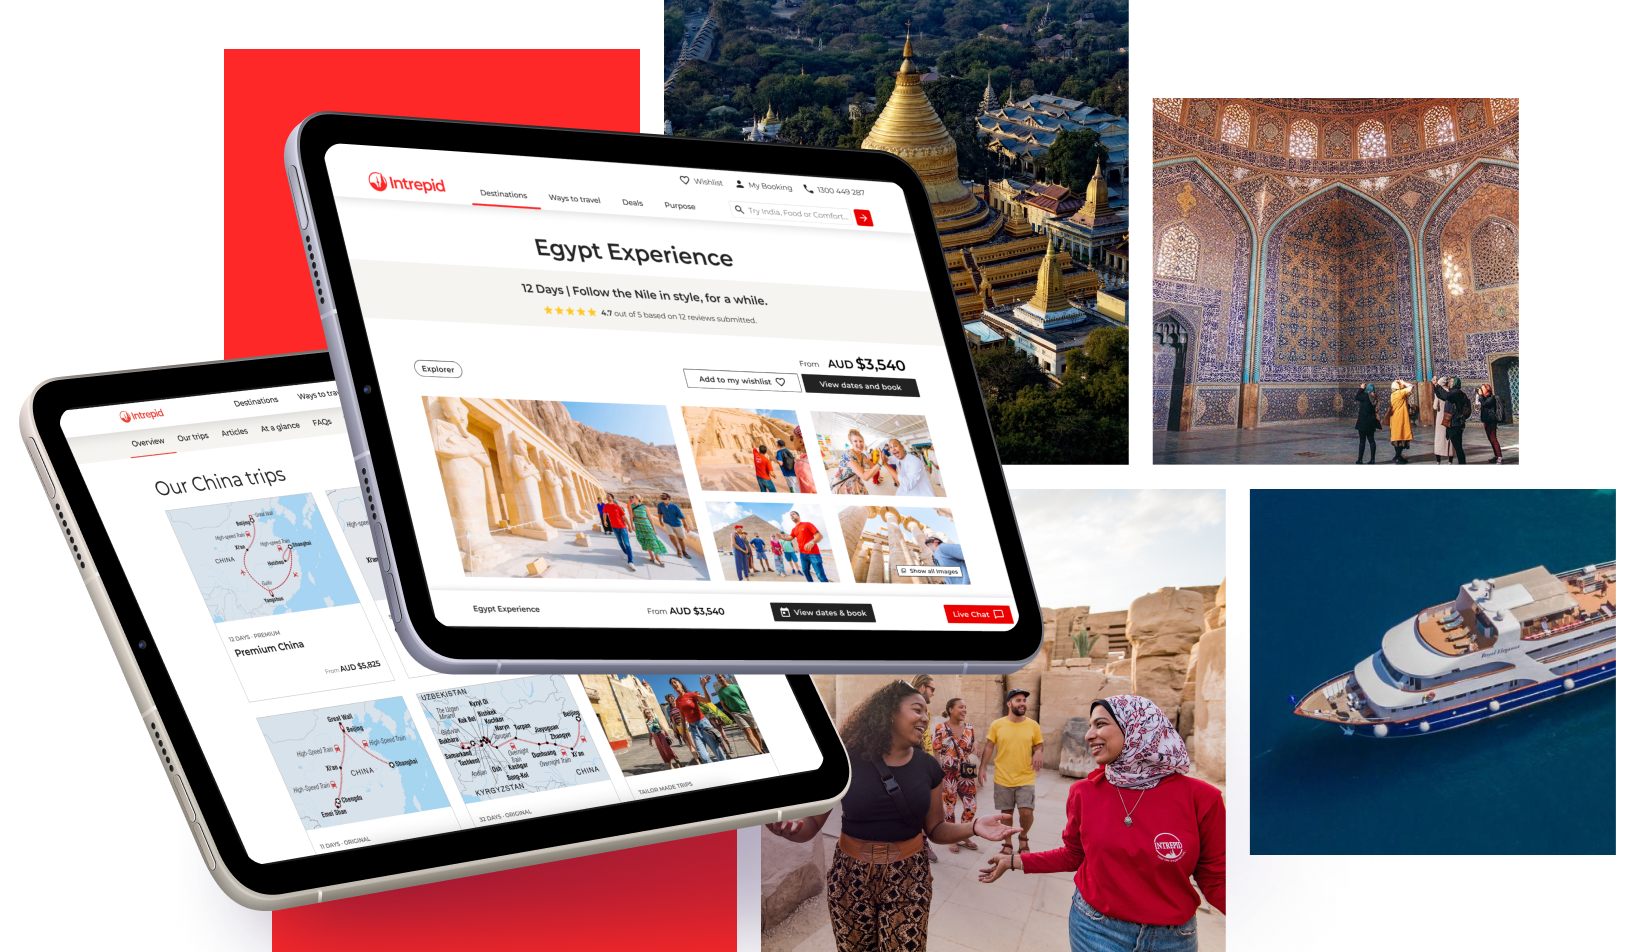 Transforming content through a headless CMS for an international travel company